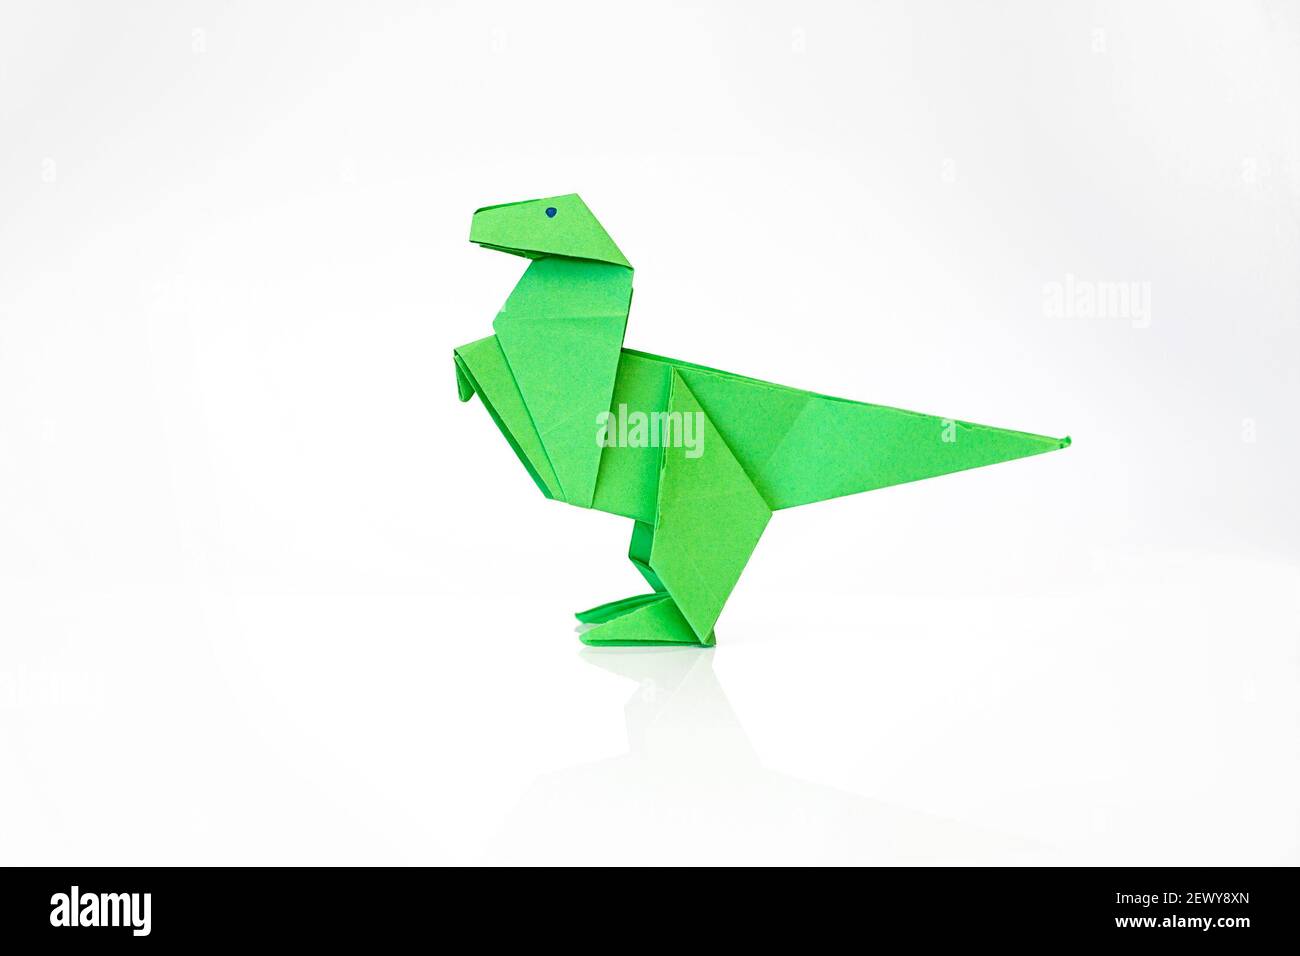 Origami paper dinosaur isolated on white background with copy space Stock Photo